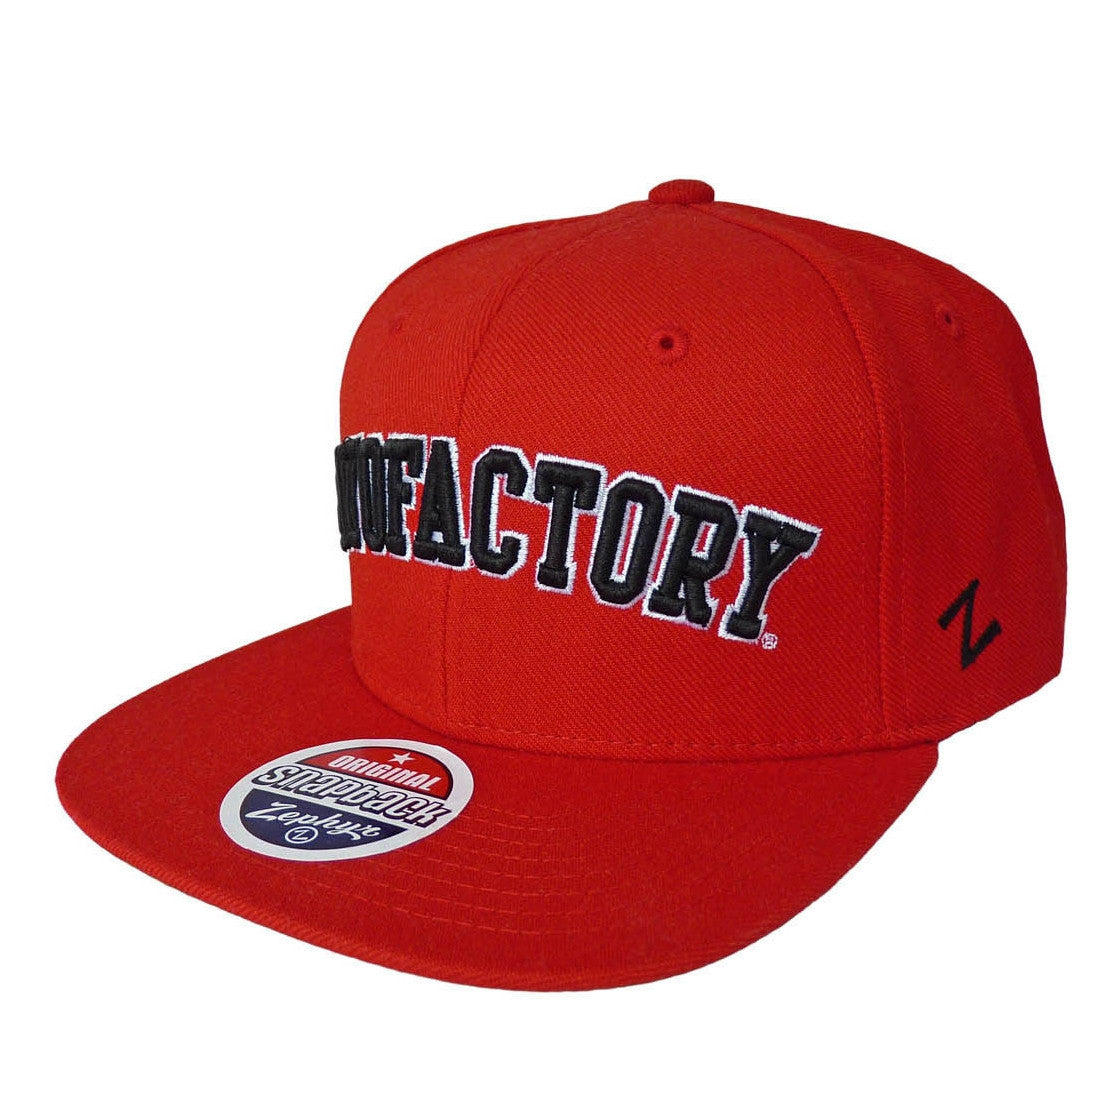 YoYoFactory Apparel and Clothing – tagged 